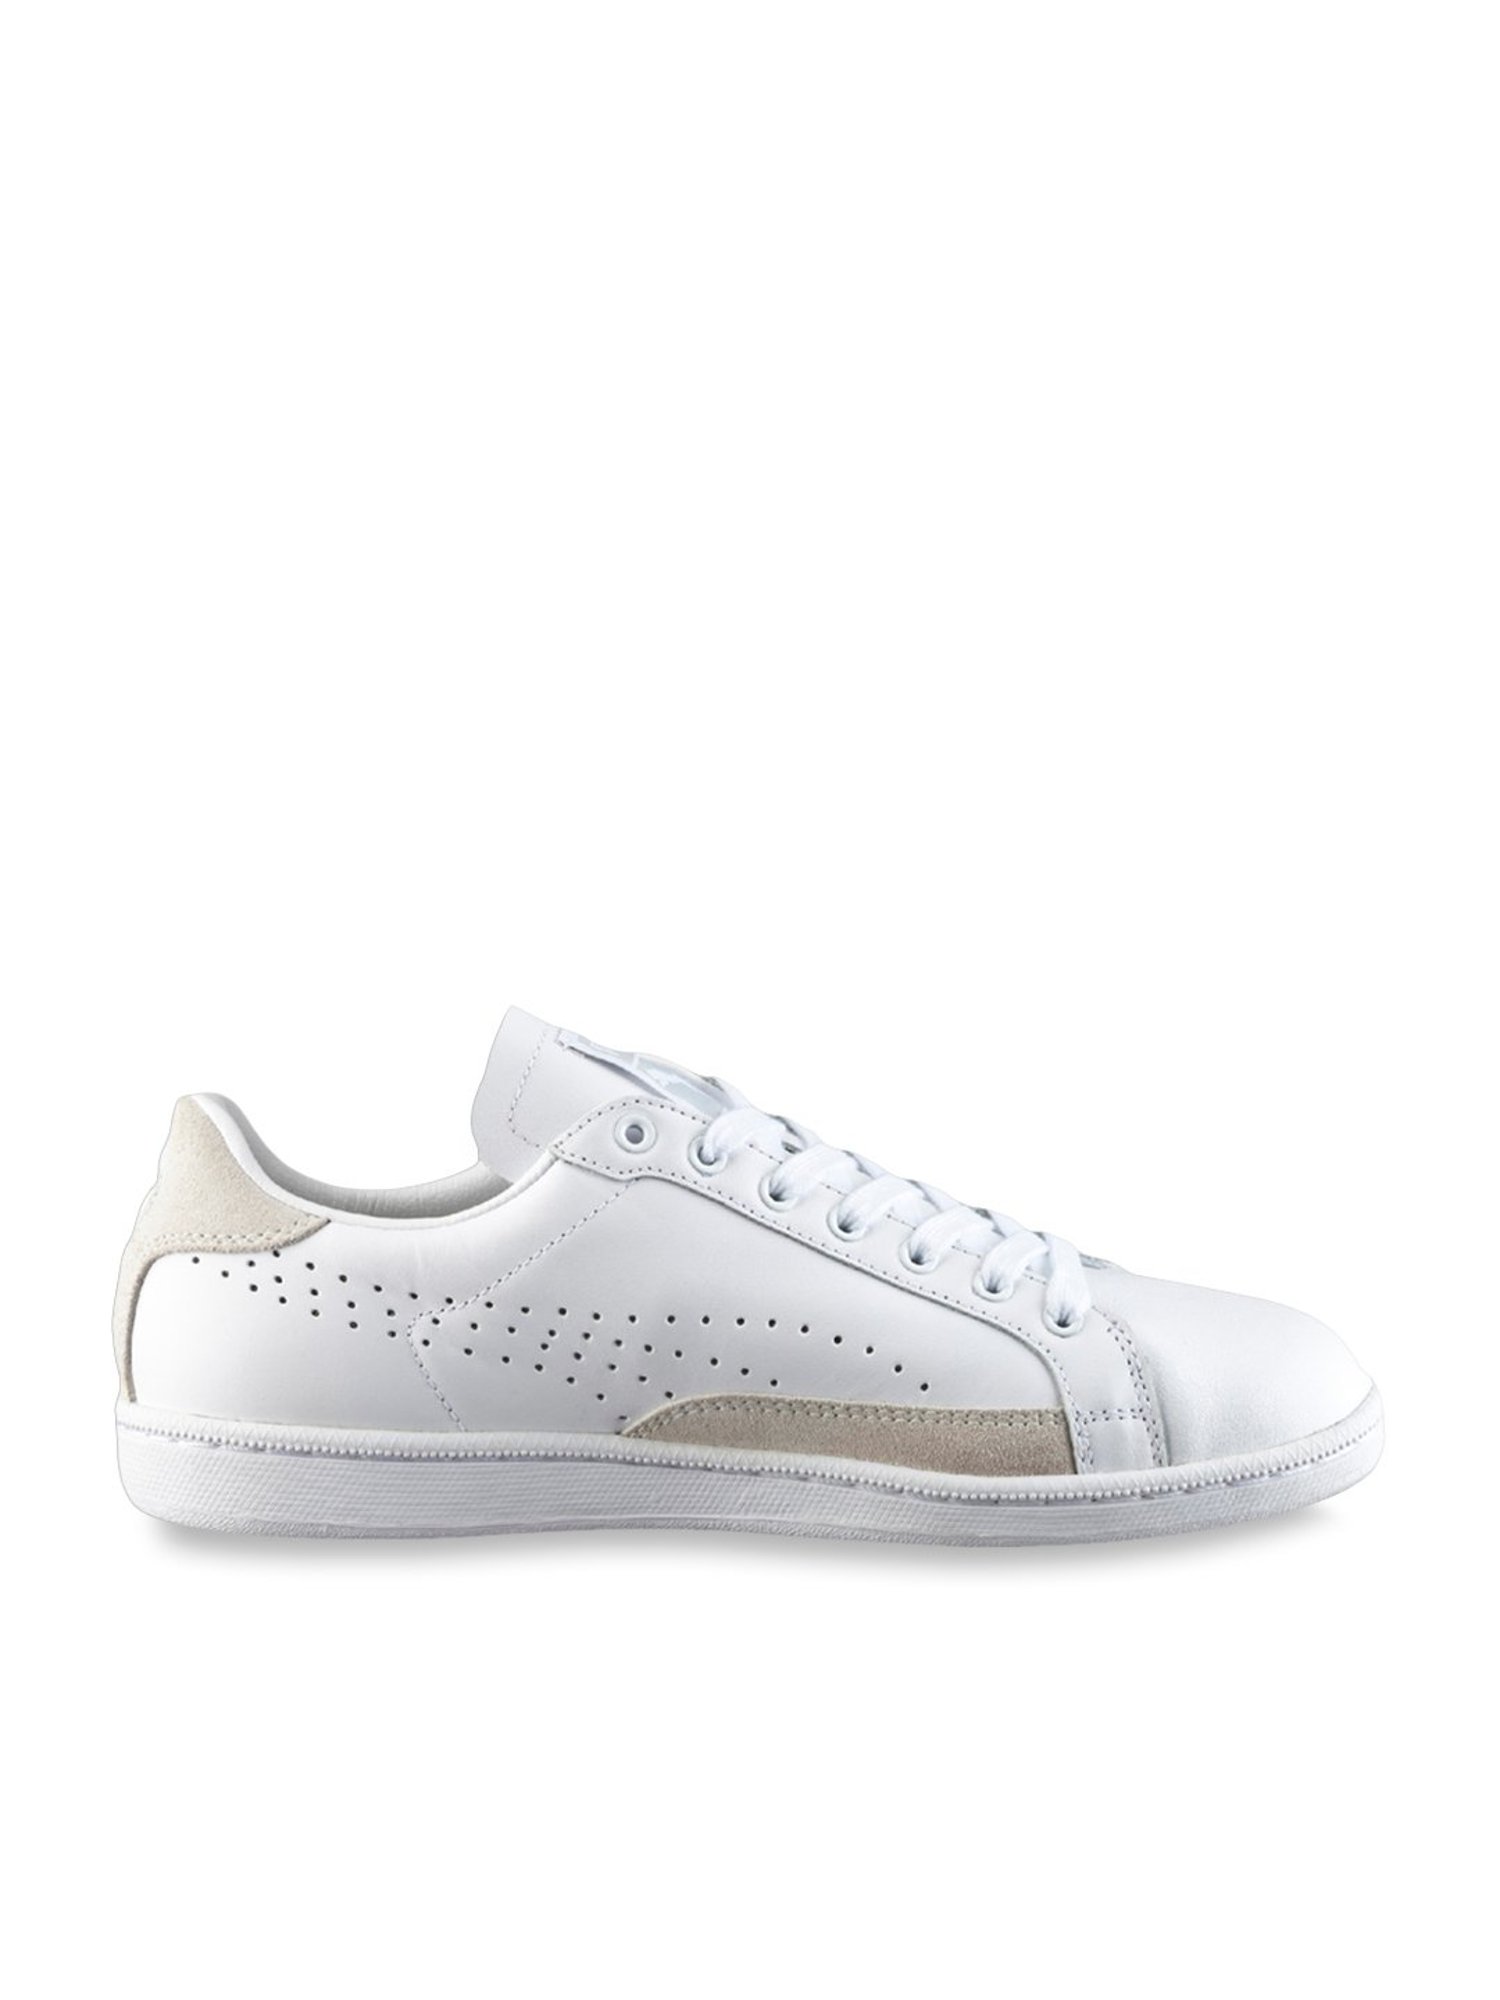 Puma Match 74 White Sneakers for Men 